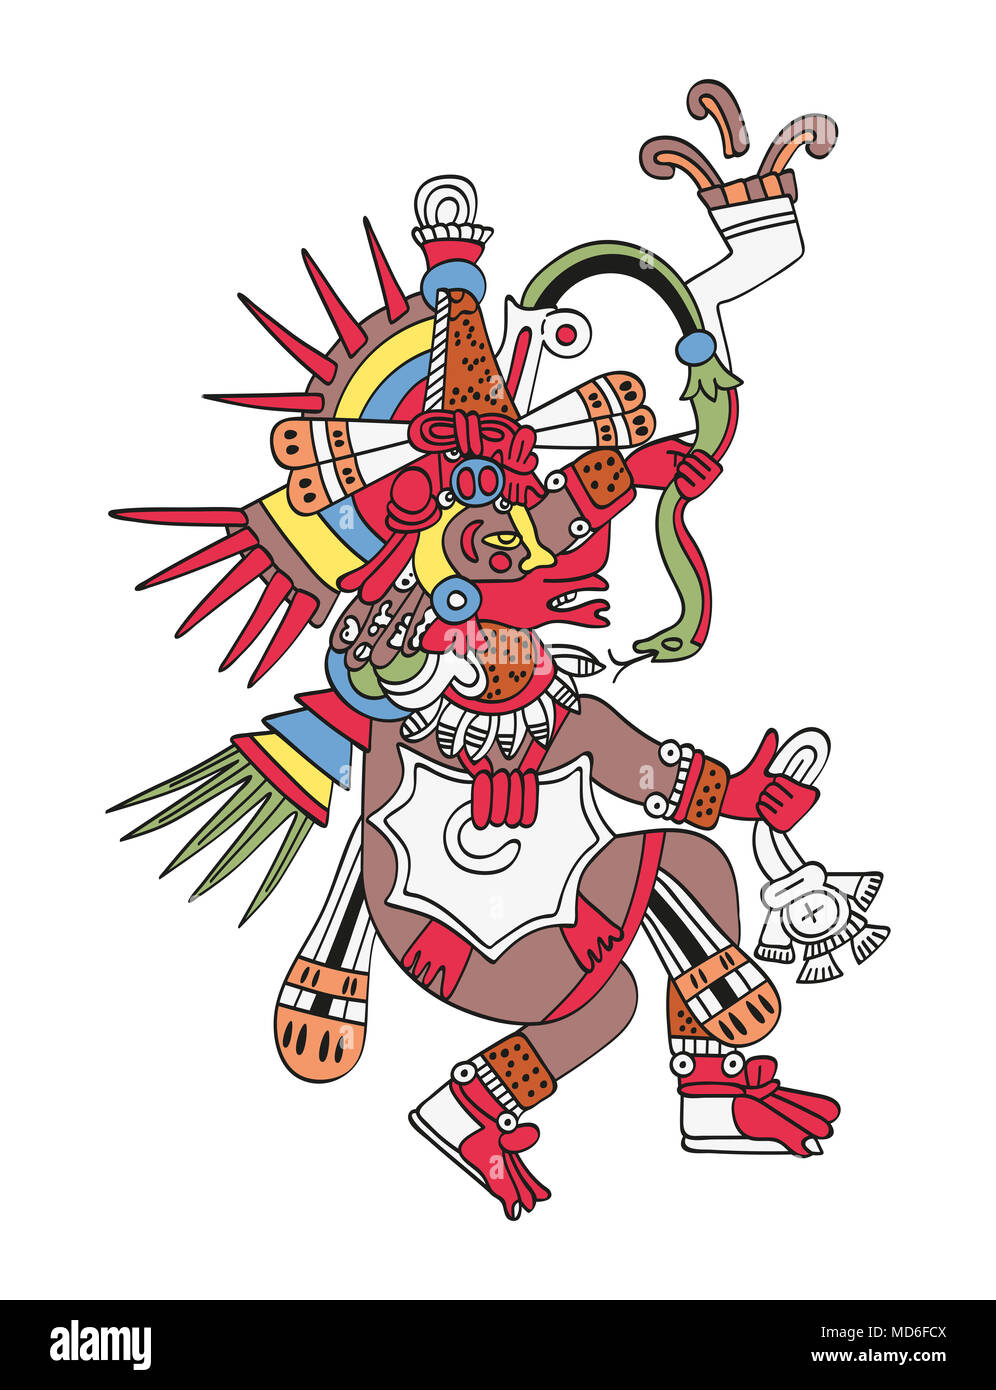 Quetzalcoatl, the feathered serpent. God of Wind and Wisdom. Twin brother of Tezcatlipoca. Deity as depicted in the antique Aztec manuscript painting. Stock Photo